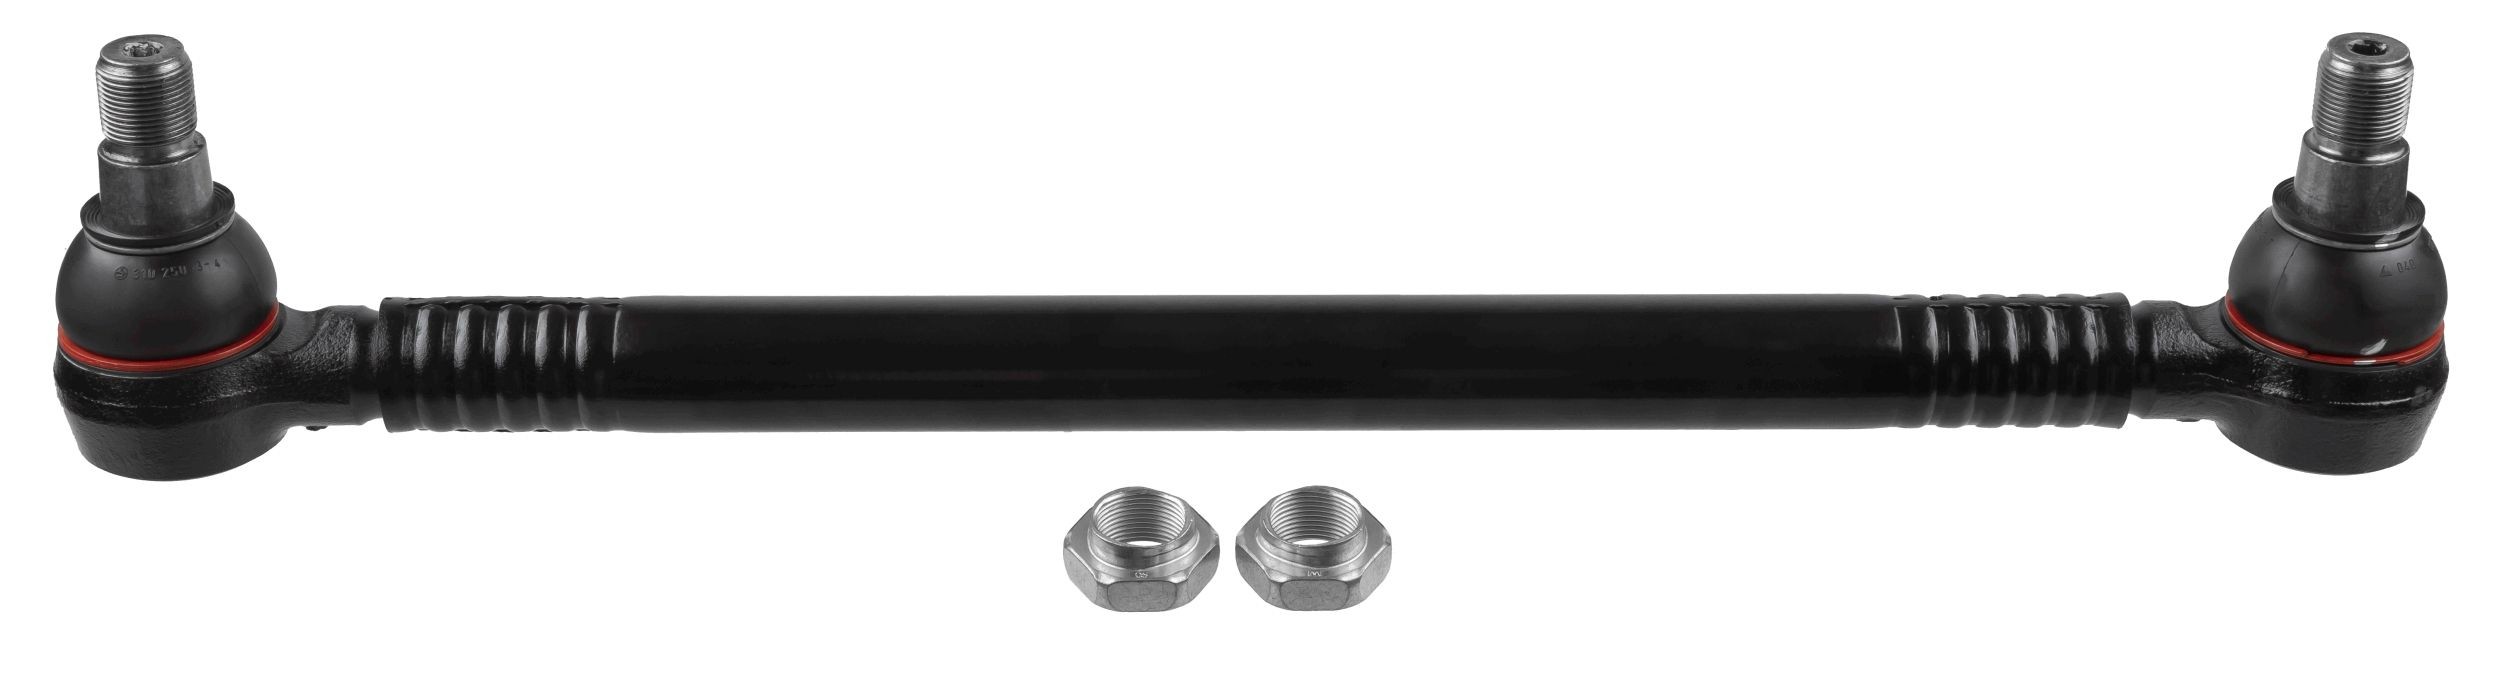 LEMFÖRDER with accessories Cone Size: 30mm, Length: 566mm Tie Rod 33305 01 buy